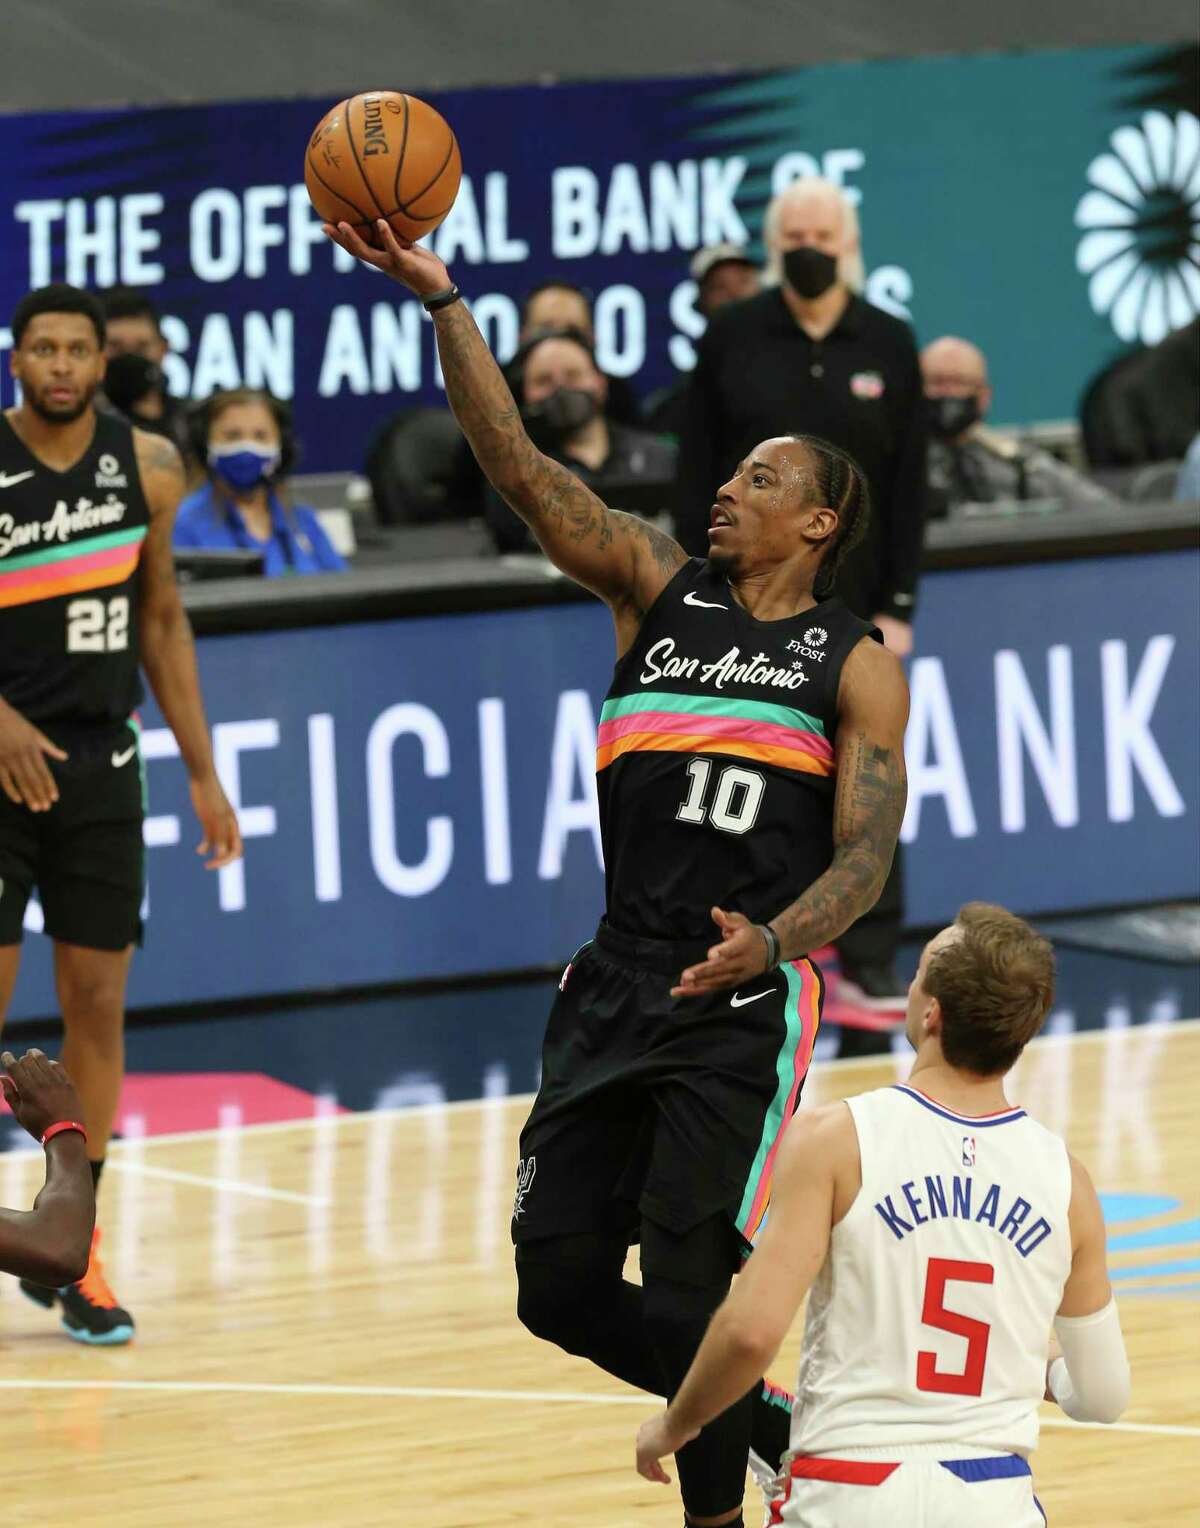 Spurs' DeMar DeRozan (10) scores the last shot of the first half against the Los Angeles Clippers' Luke Kennard (05) at the AT&T Center on Thursday, Mar. 25, 2021.